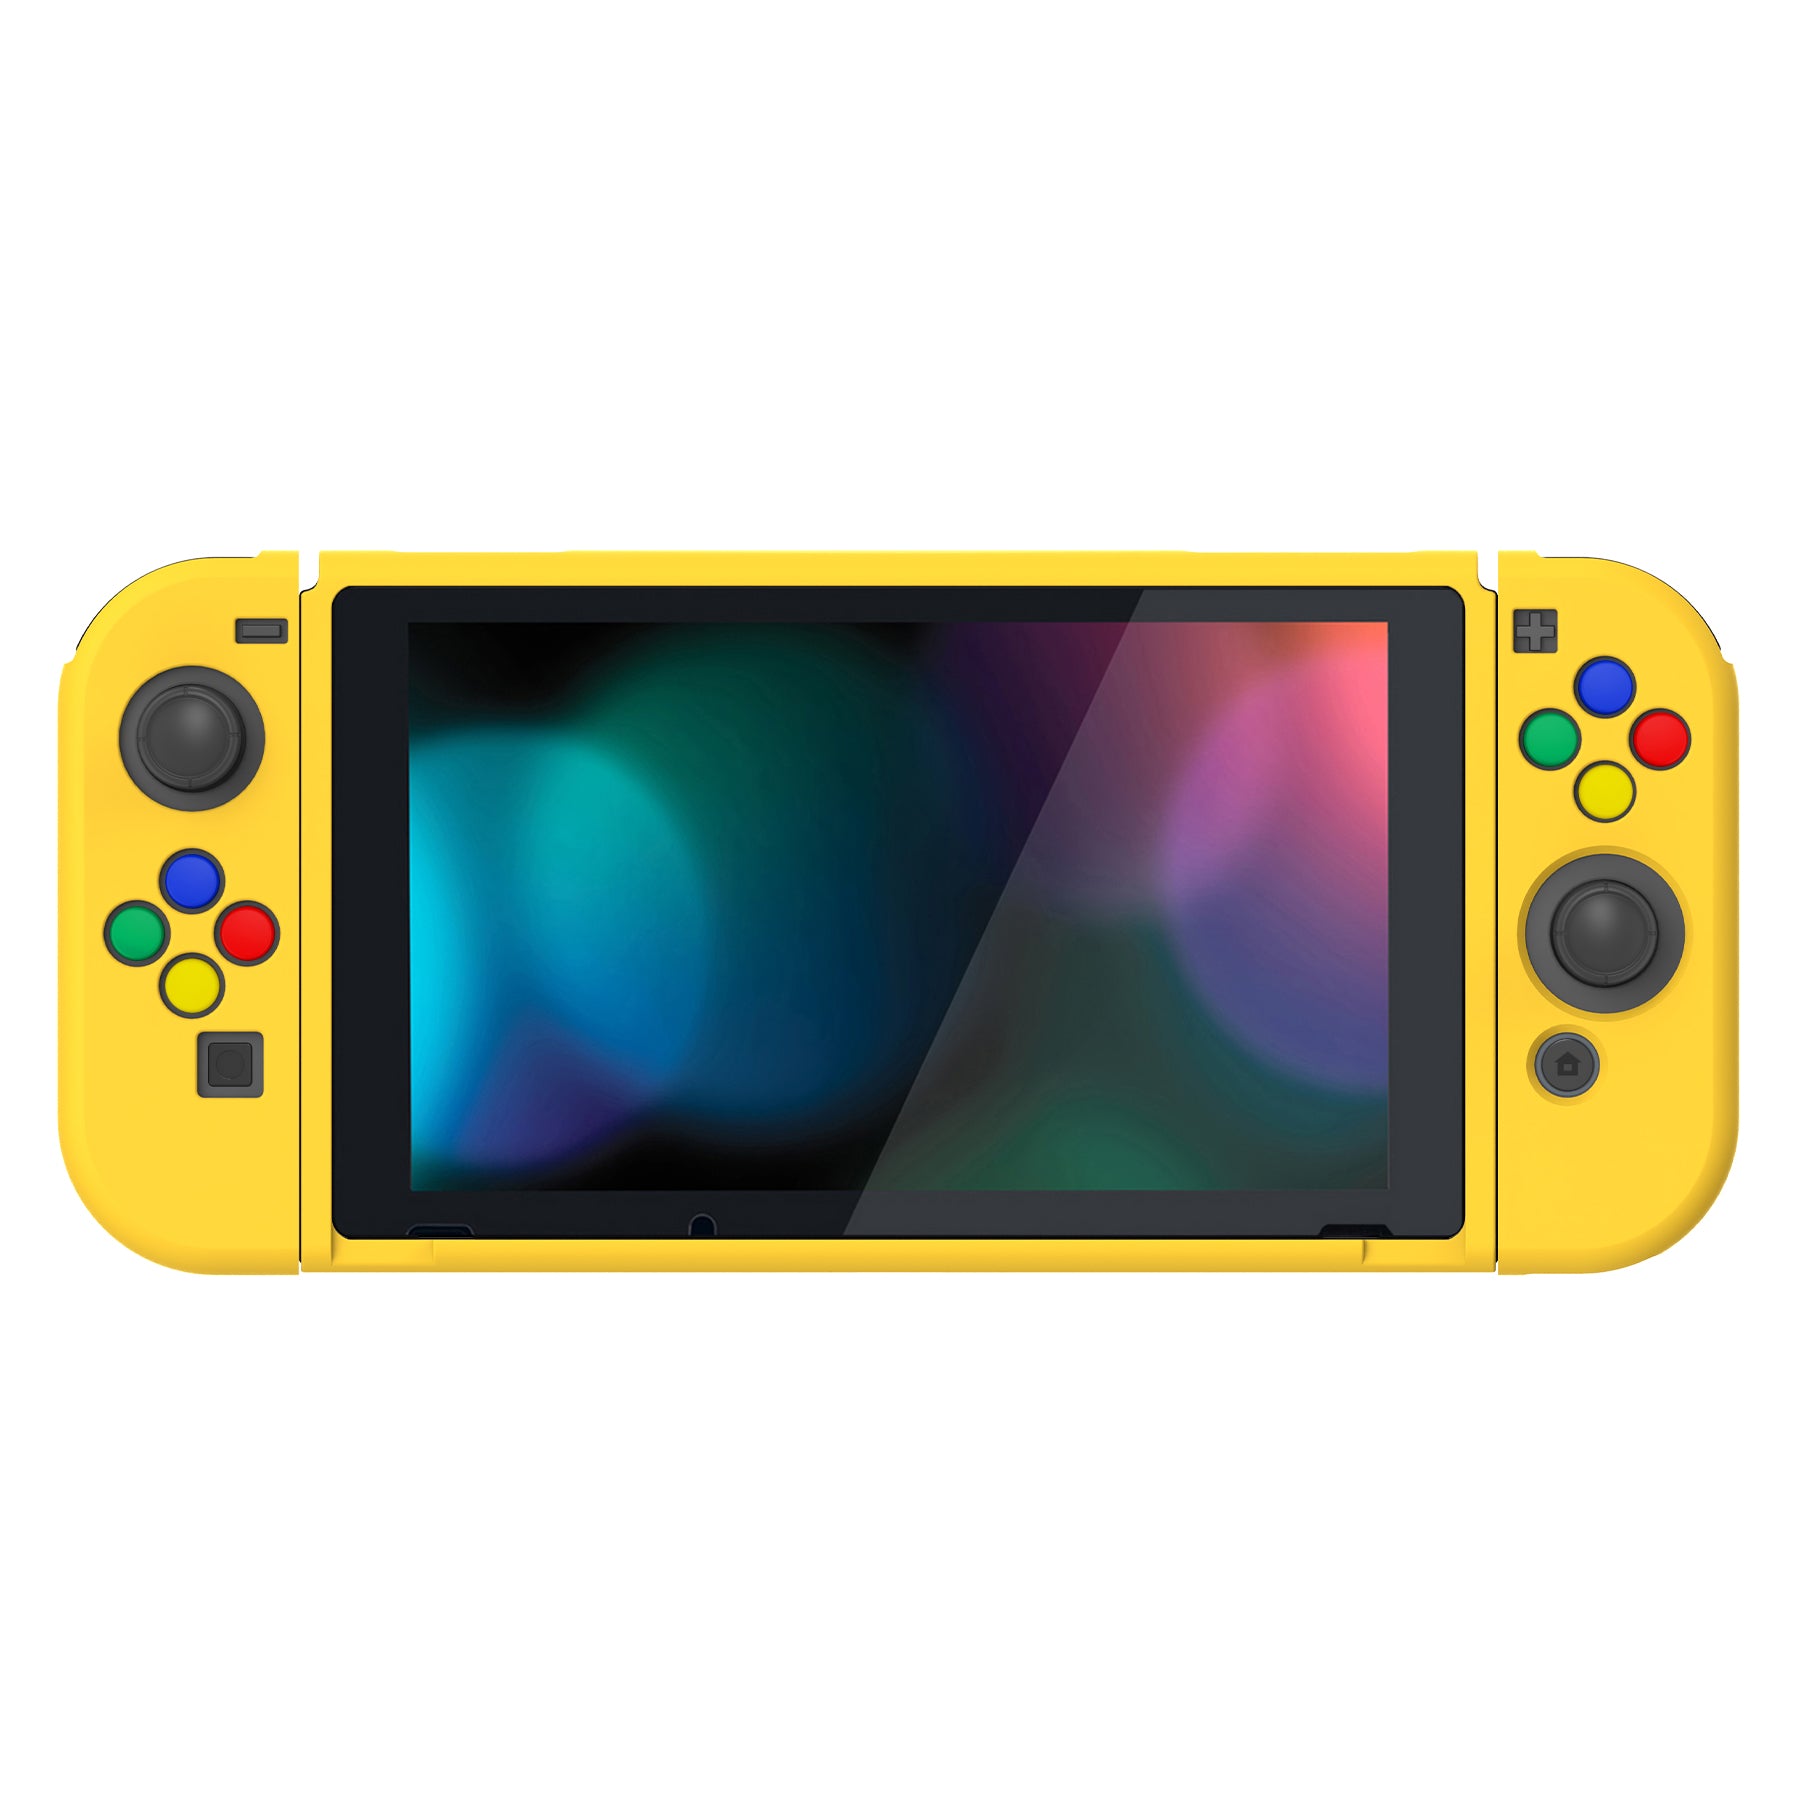 PlayVital Yellow Protective Case for NS Switch, Soft TPU Slim Case Cover for NS Switch Joy-Con Console with Colorful ABXY Direction Button Caps - NTU6005 PlayVital